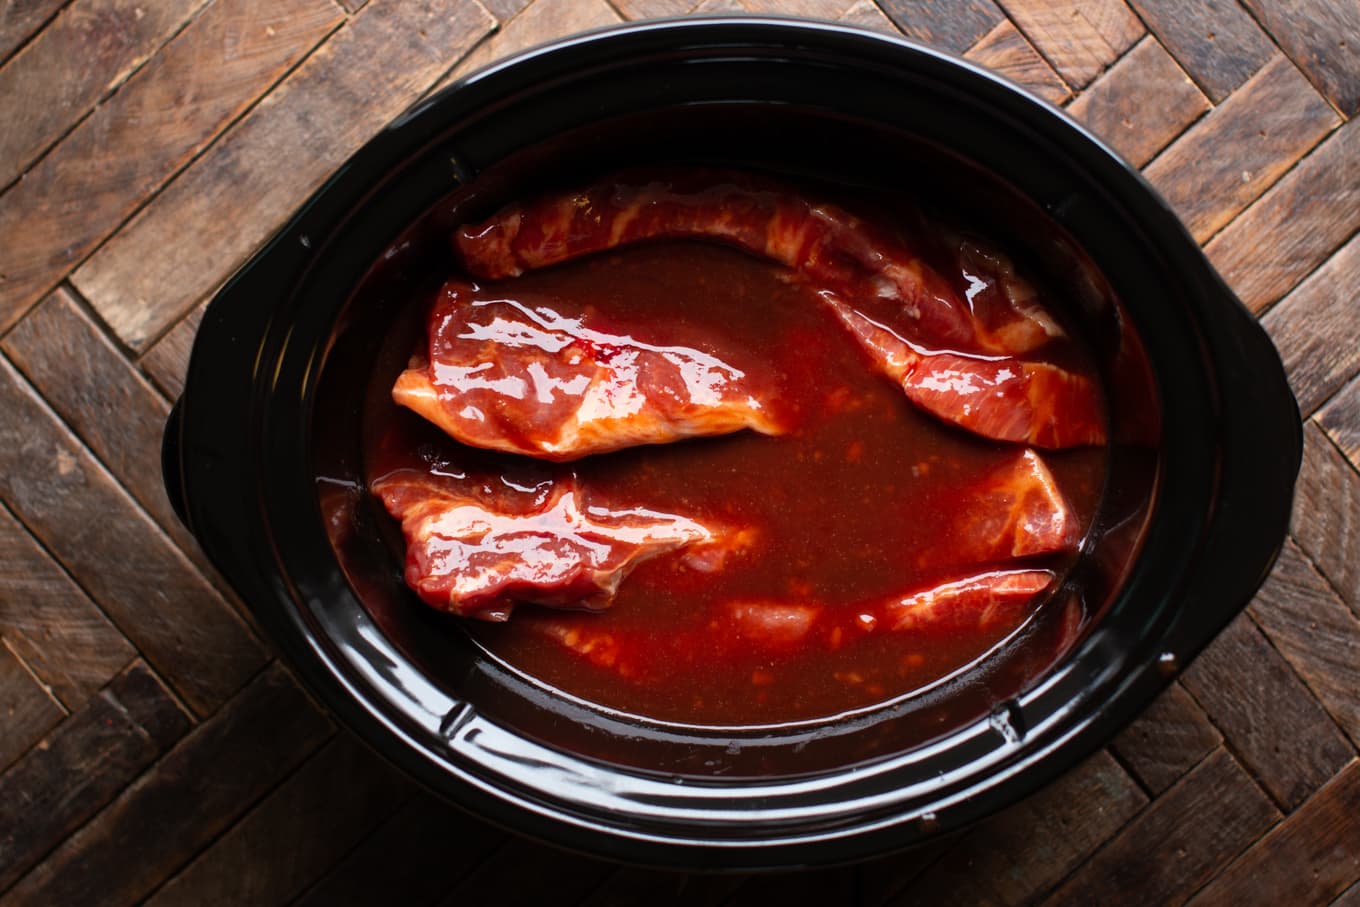 uncooked country style ribs with homemade sweet and sour sauce.